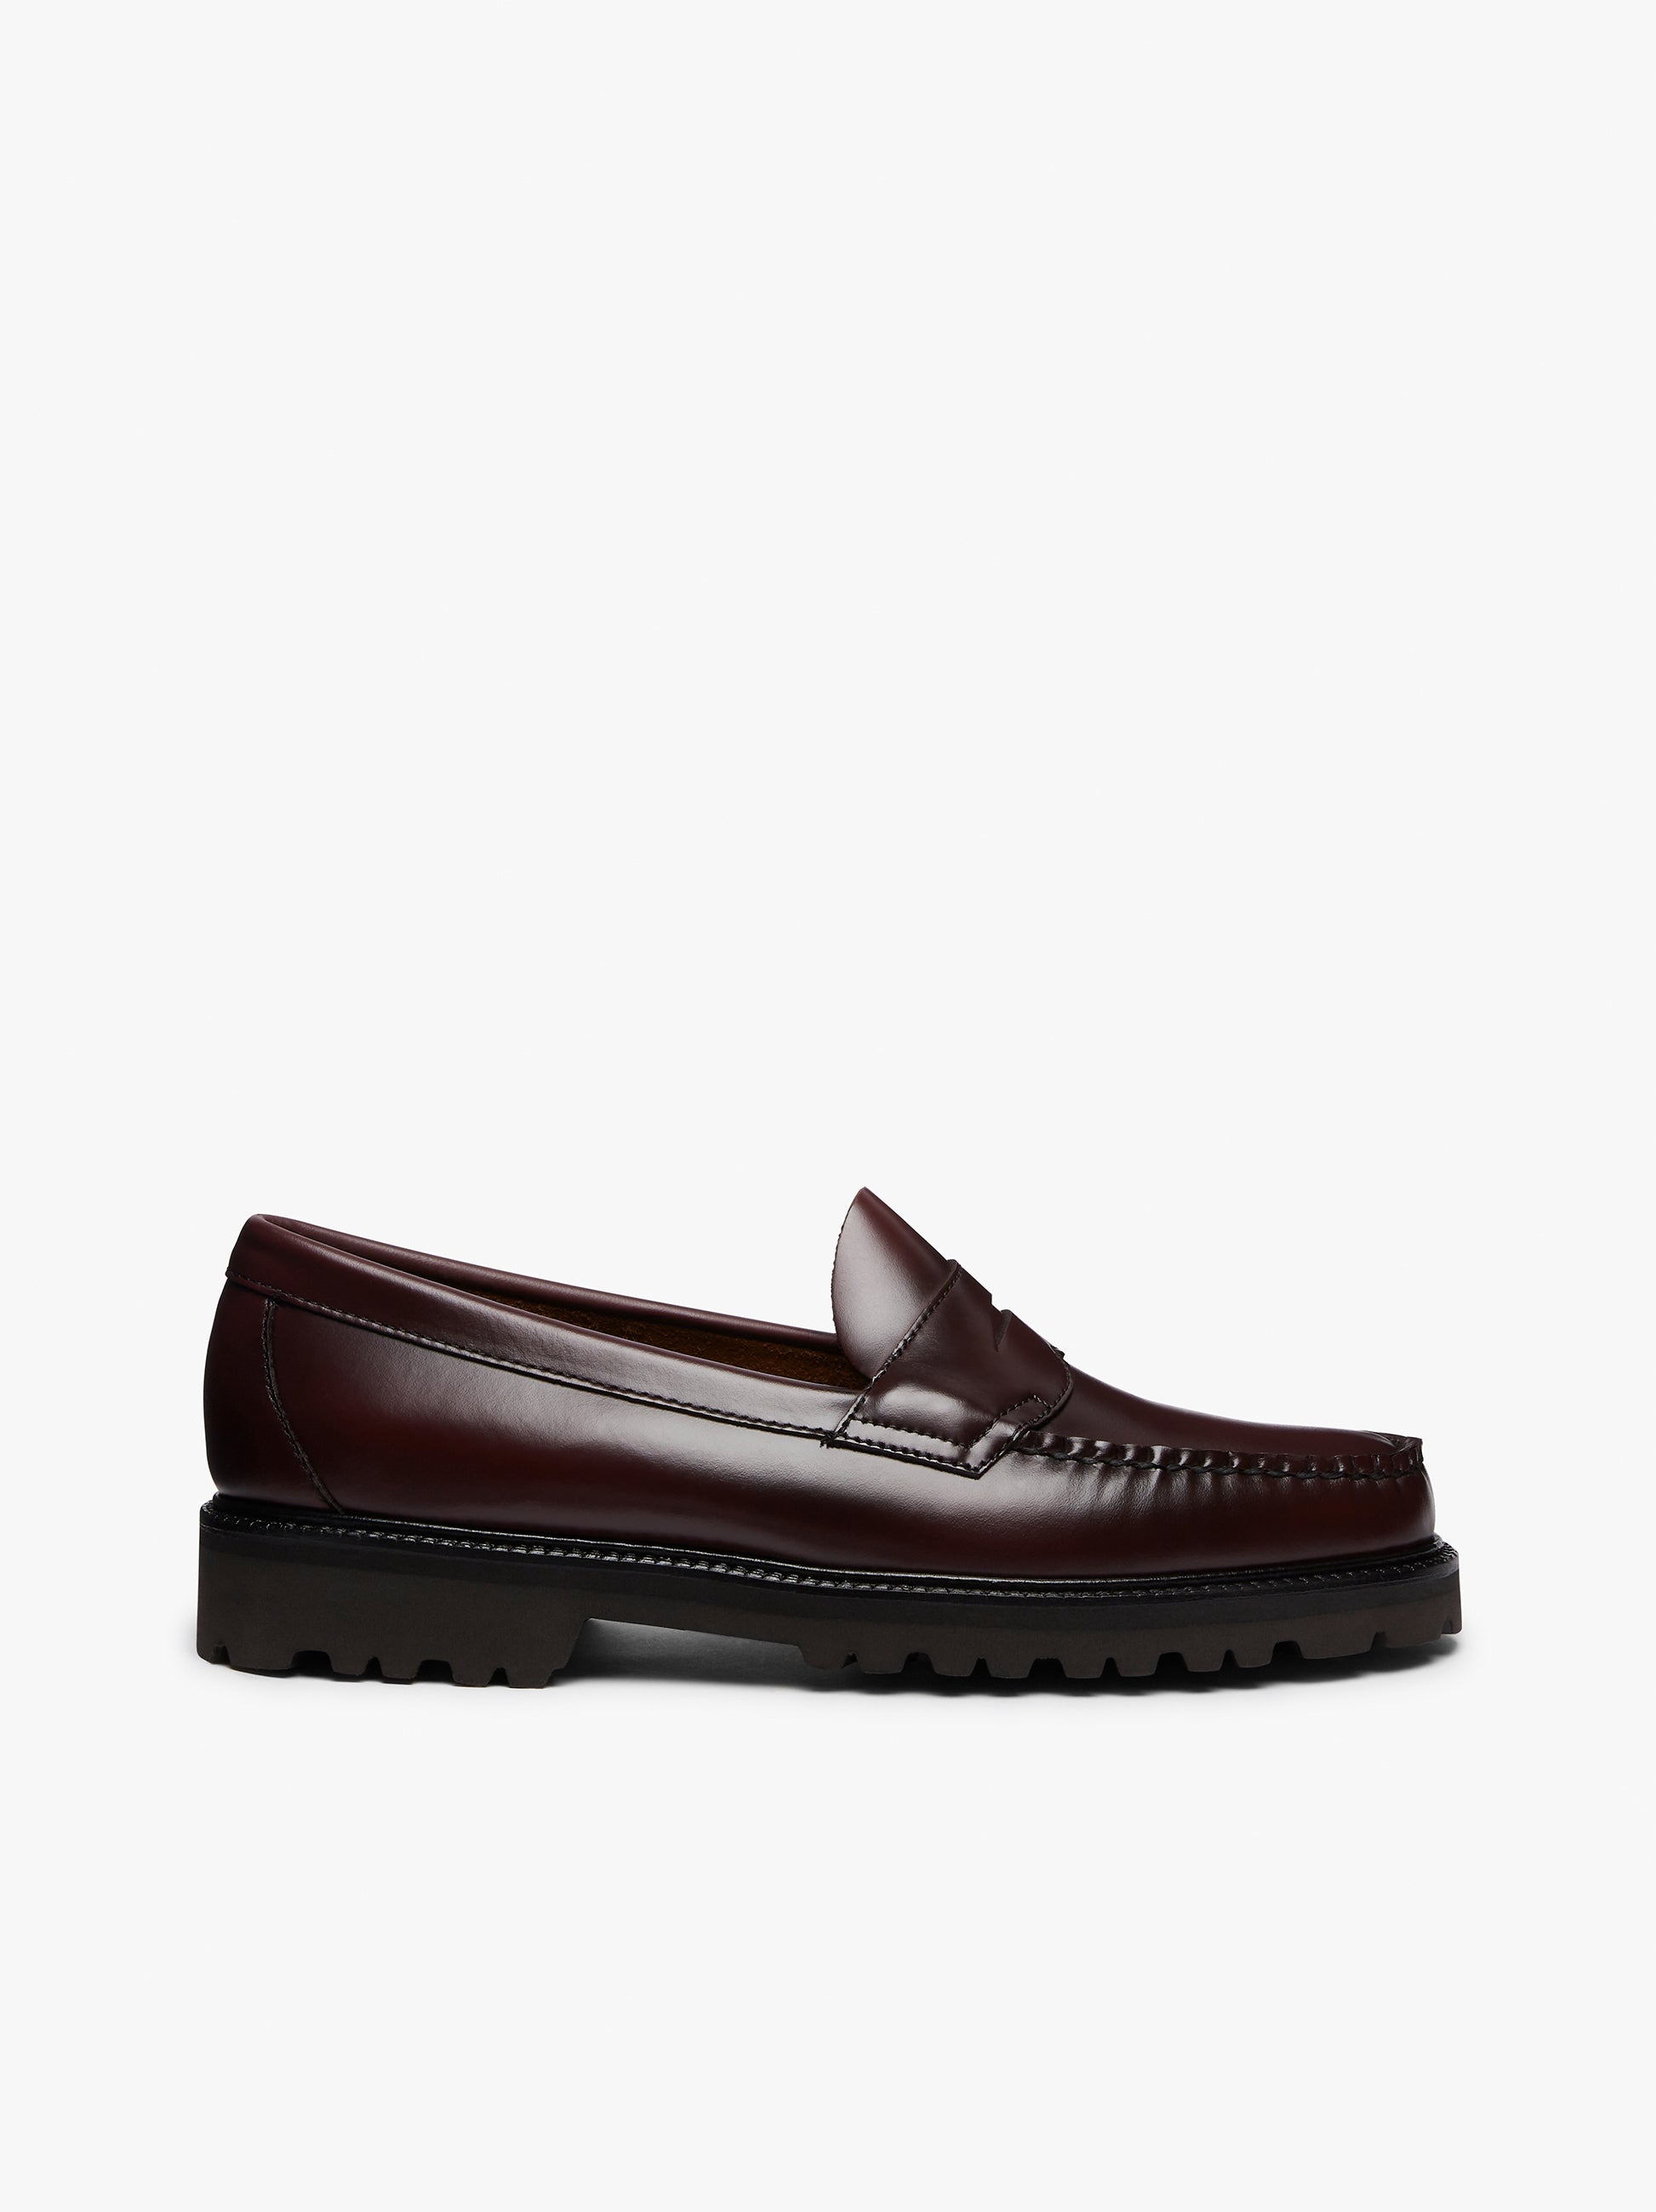 Weejuns 90s Logan Penny Loafers – G.H.BASS 1876